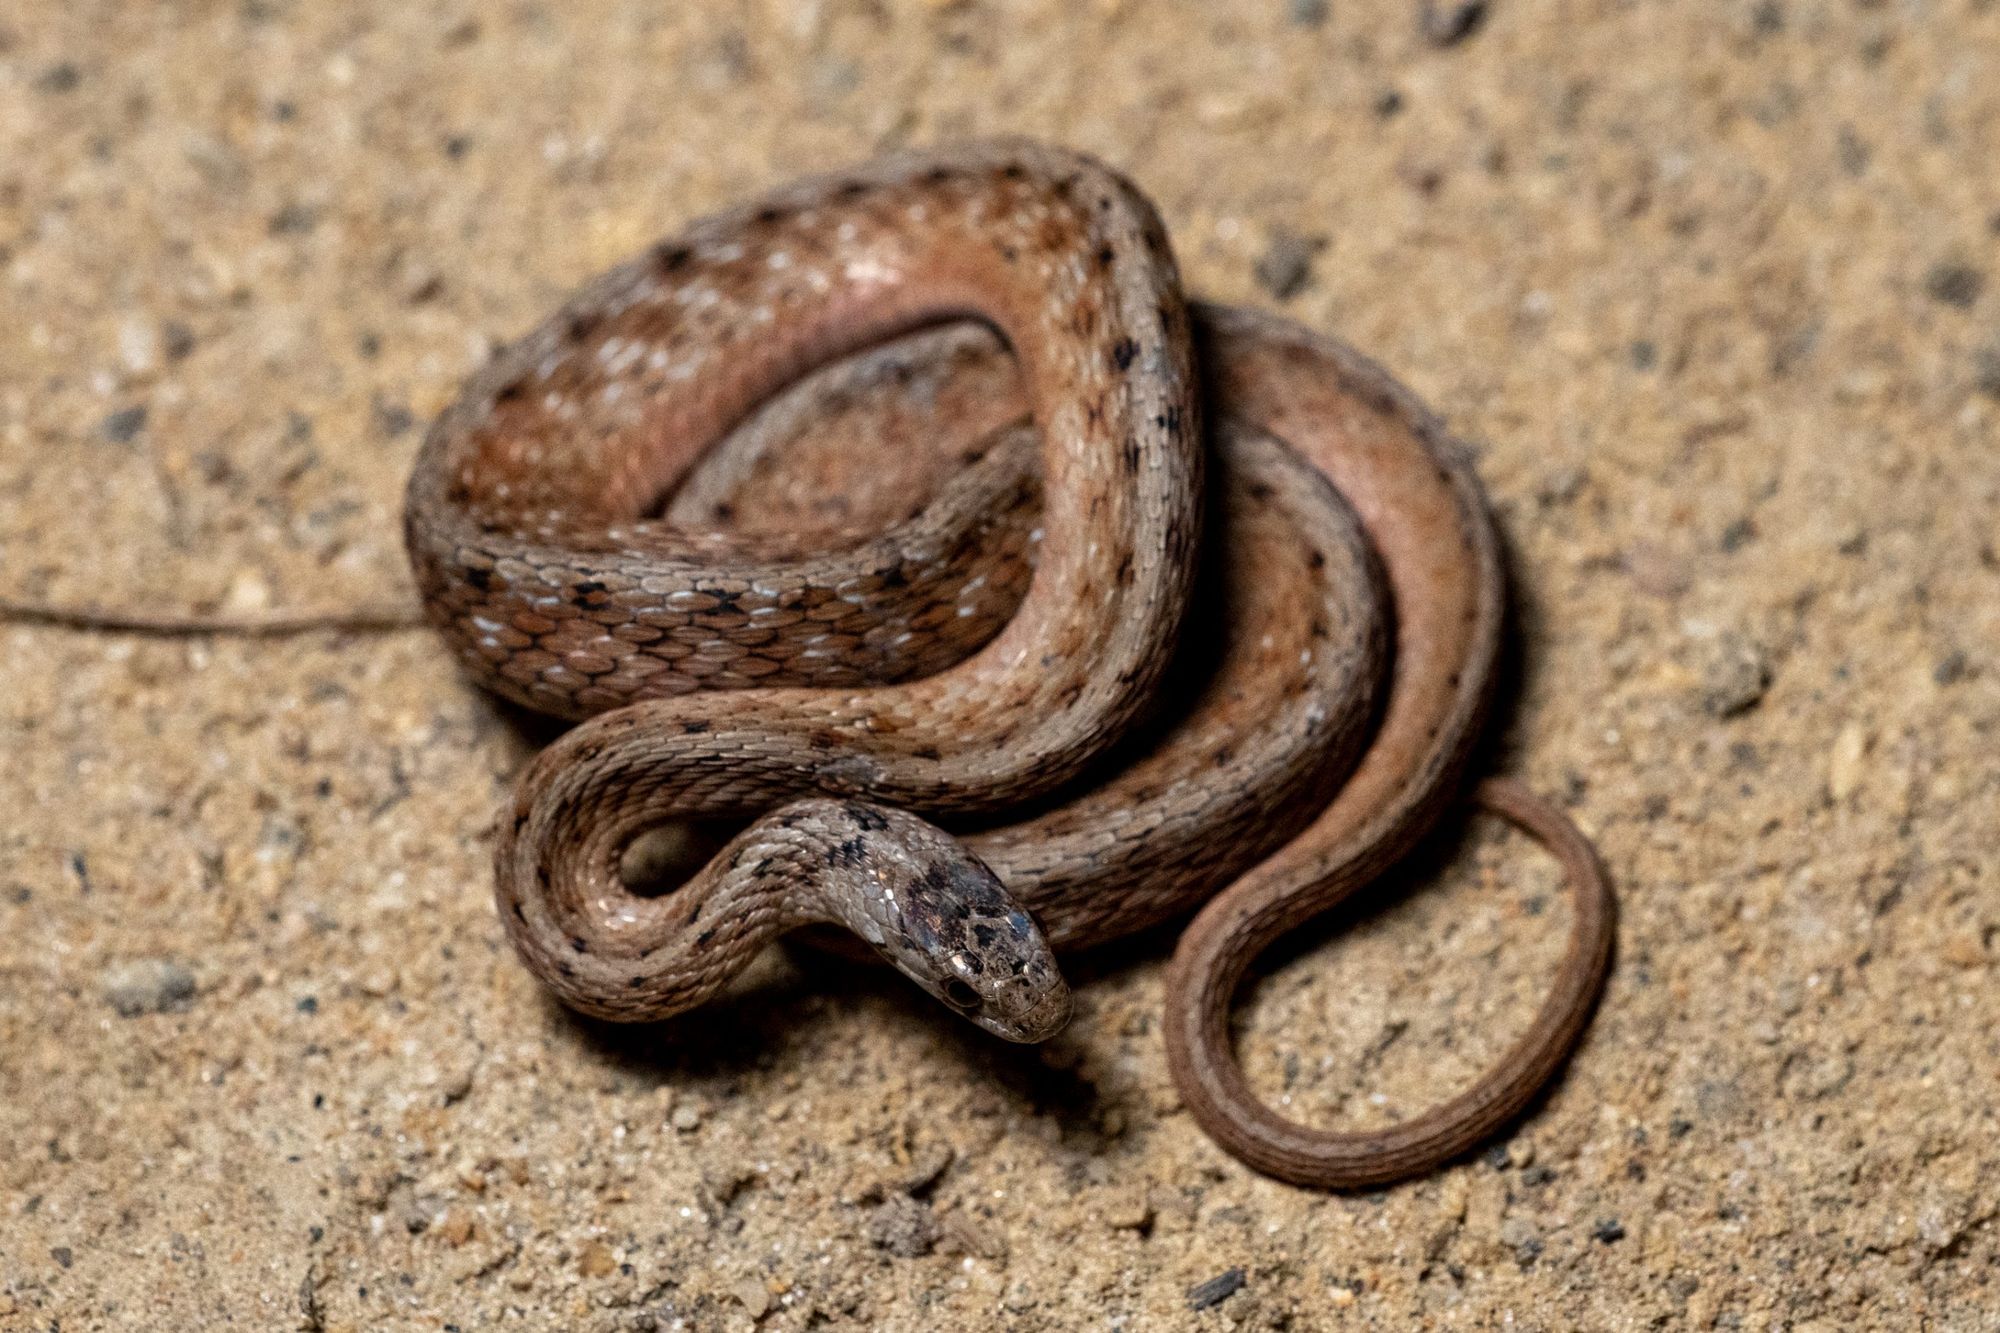 A brown and tan snake lies coiled in sand.